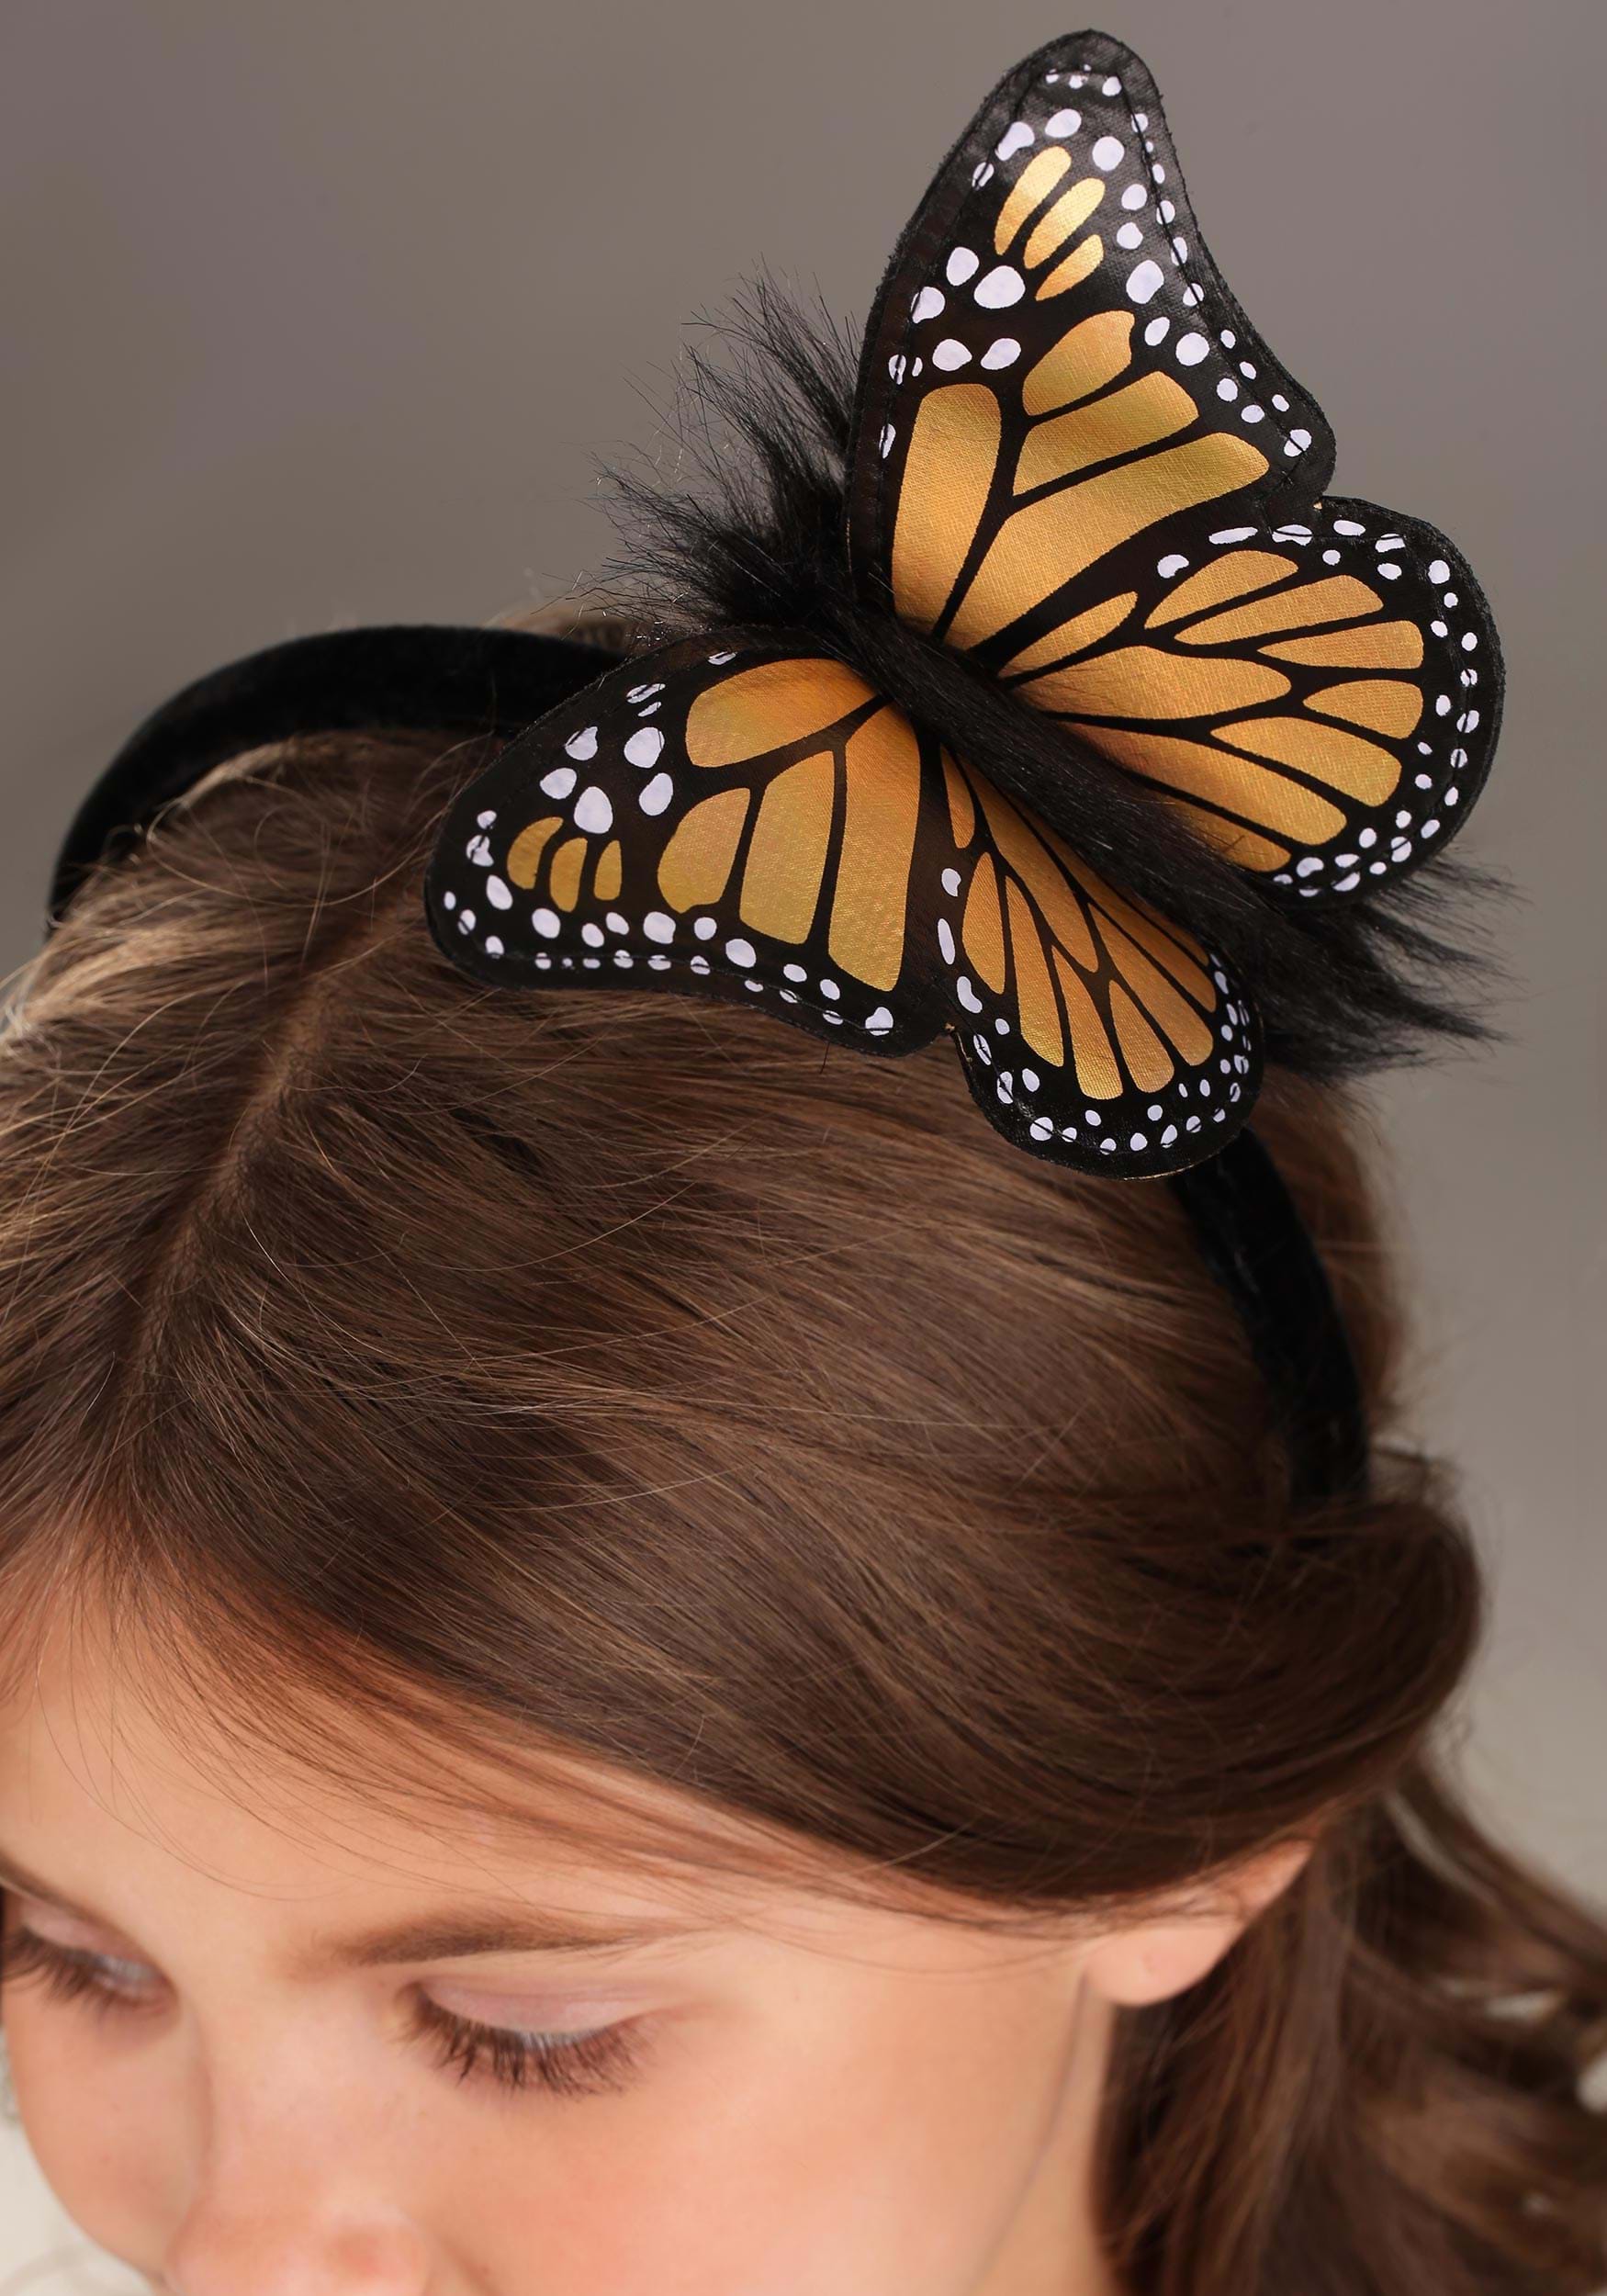 Springy Monarch Butterfly Headband Costume